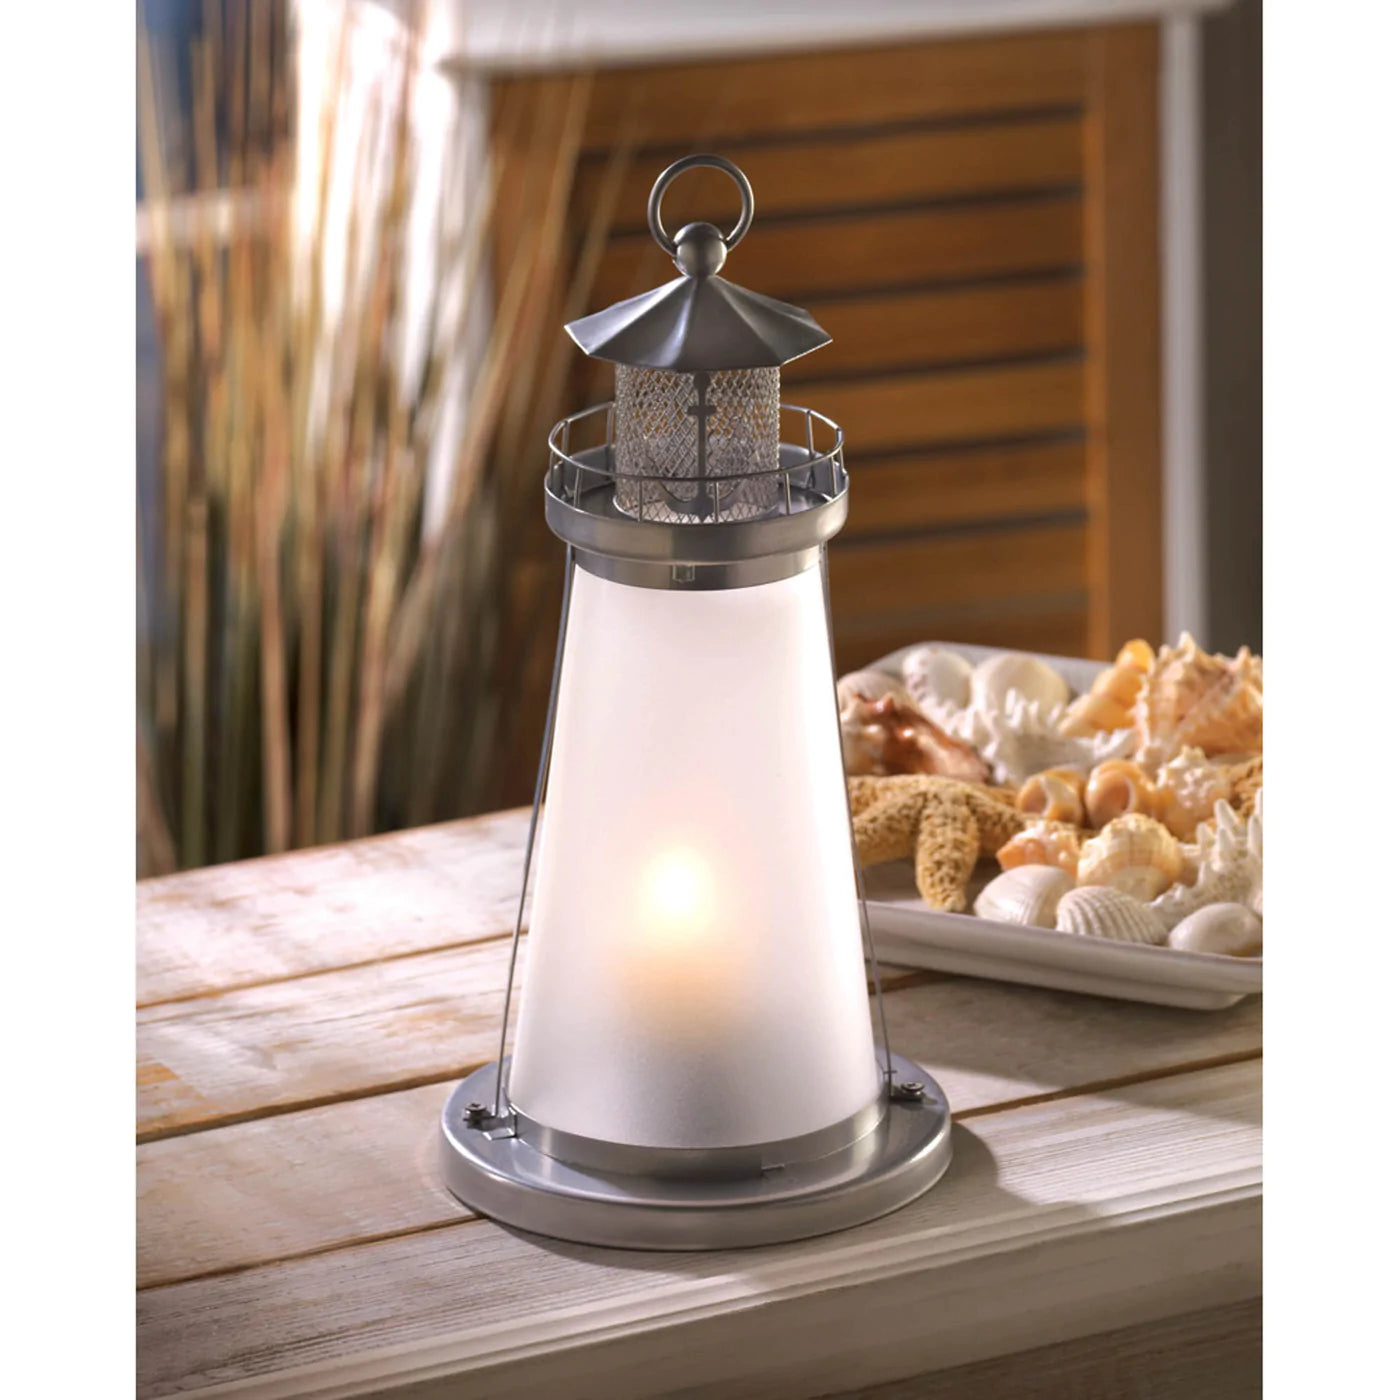 Lookout Lighthouse Candle Lamp